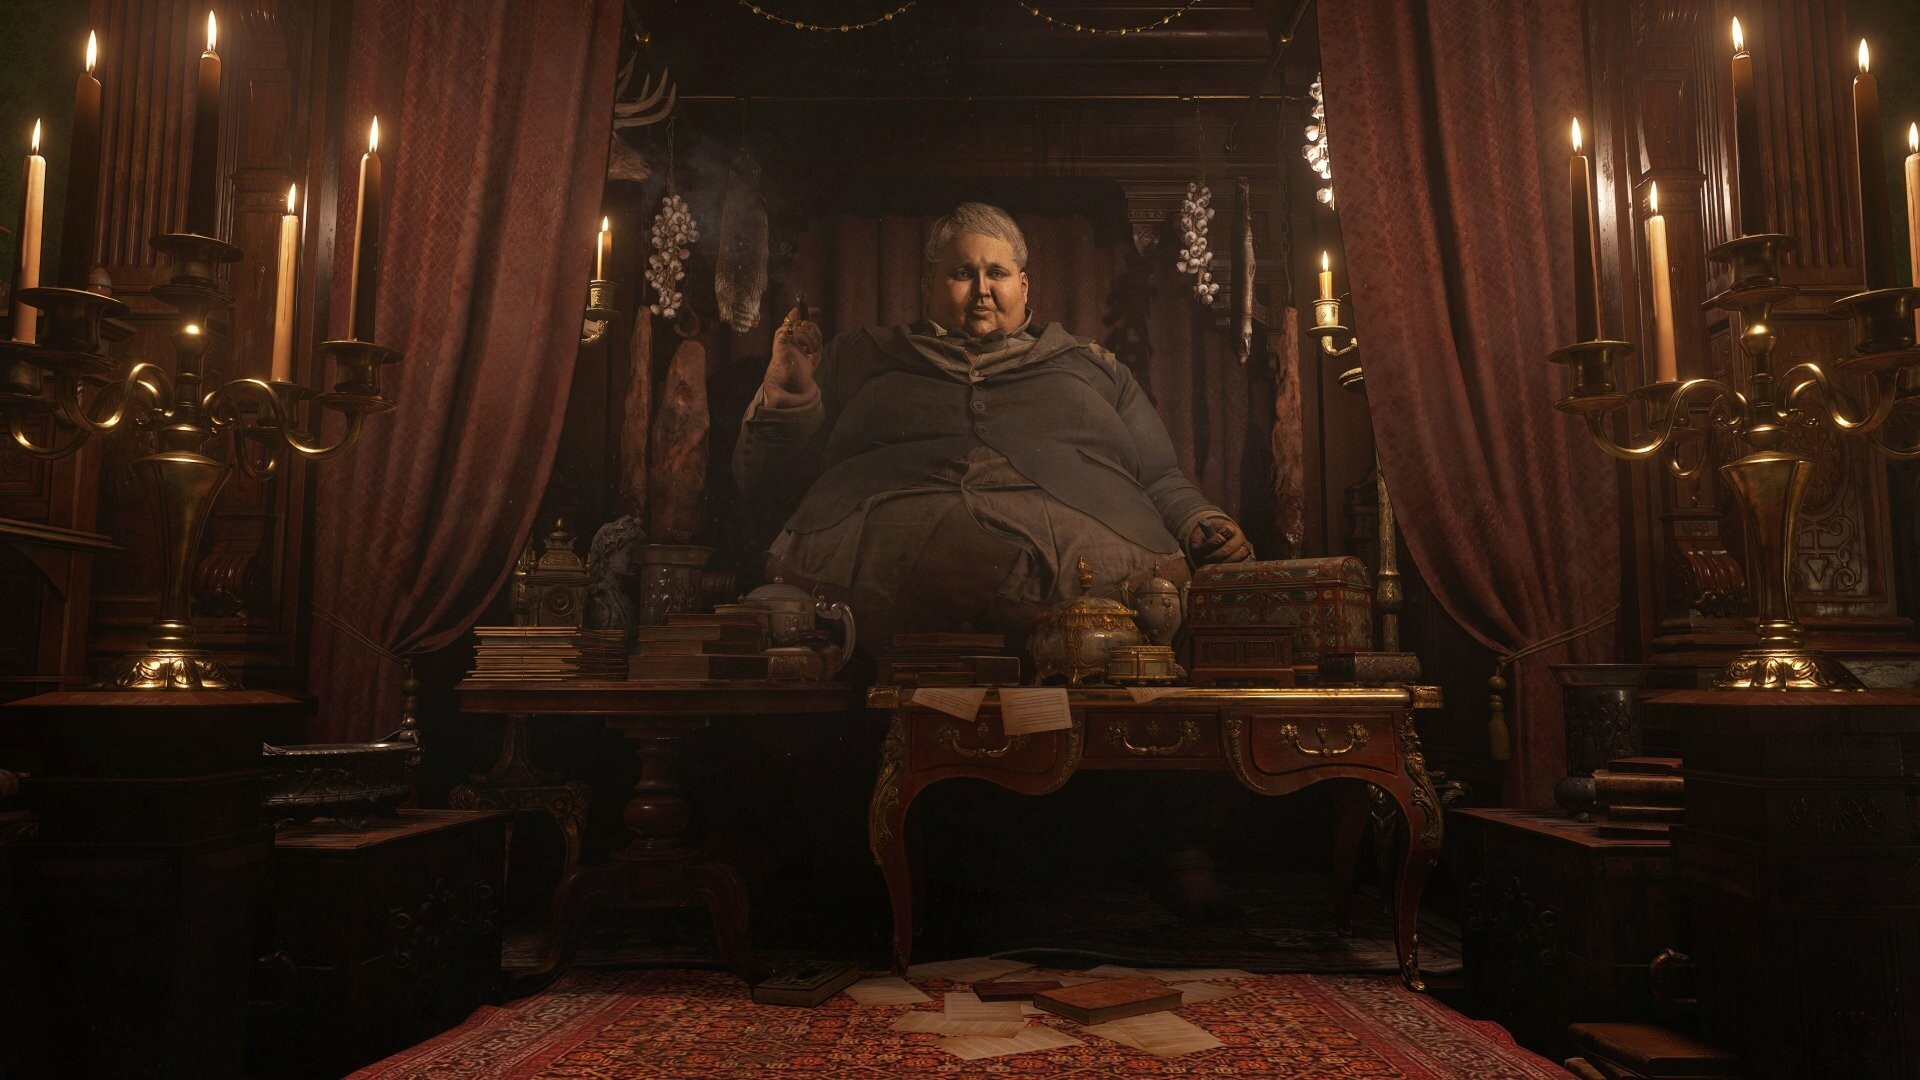 Resident Evil Village: The Duke, A mysterious, morbidly obese character who serves as a merchant and aids Ethan Winters. 1920x1080 Full HD Wallpaper.